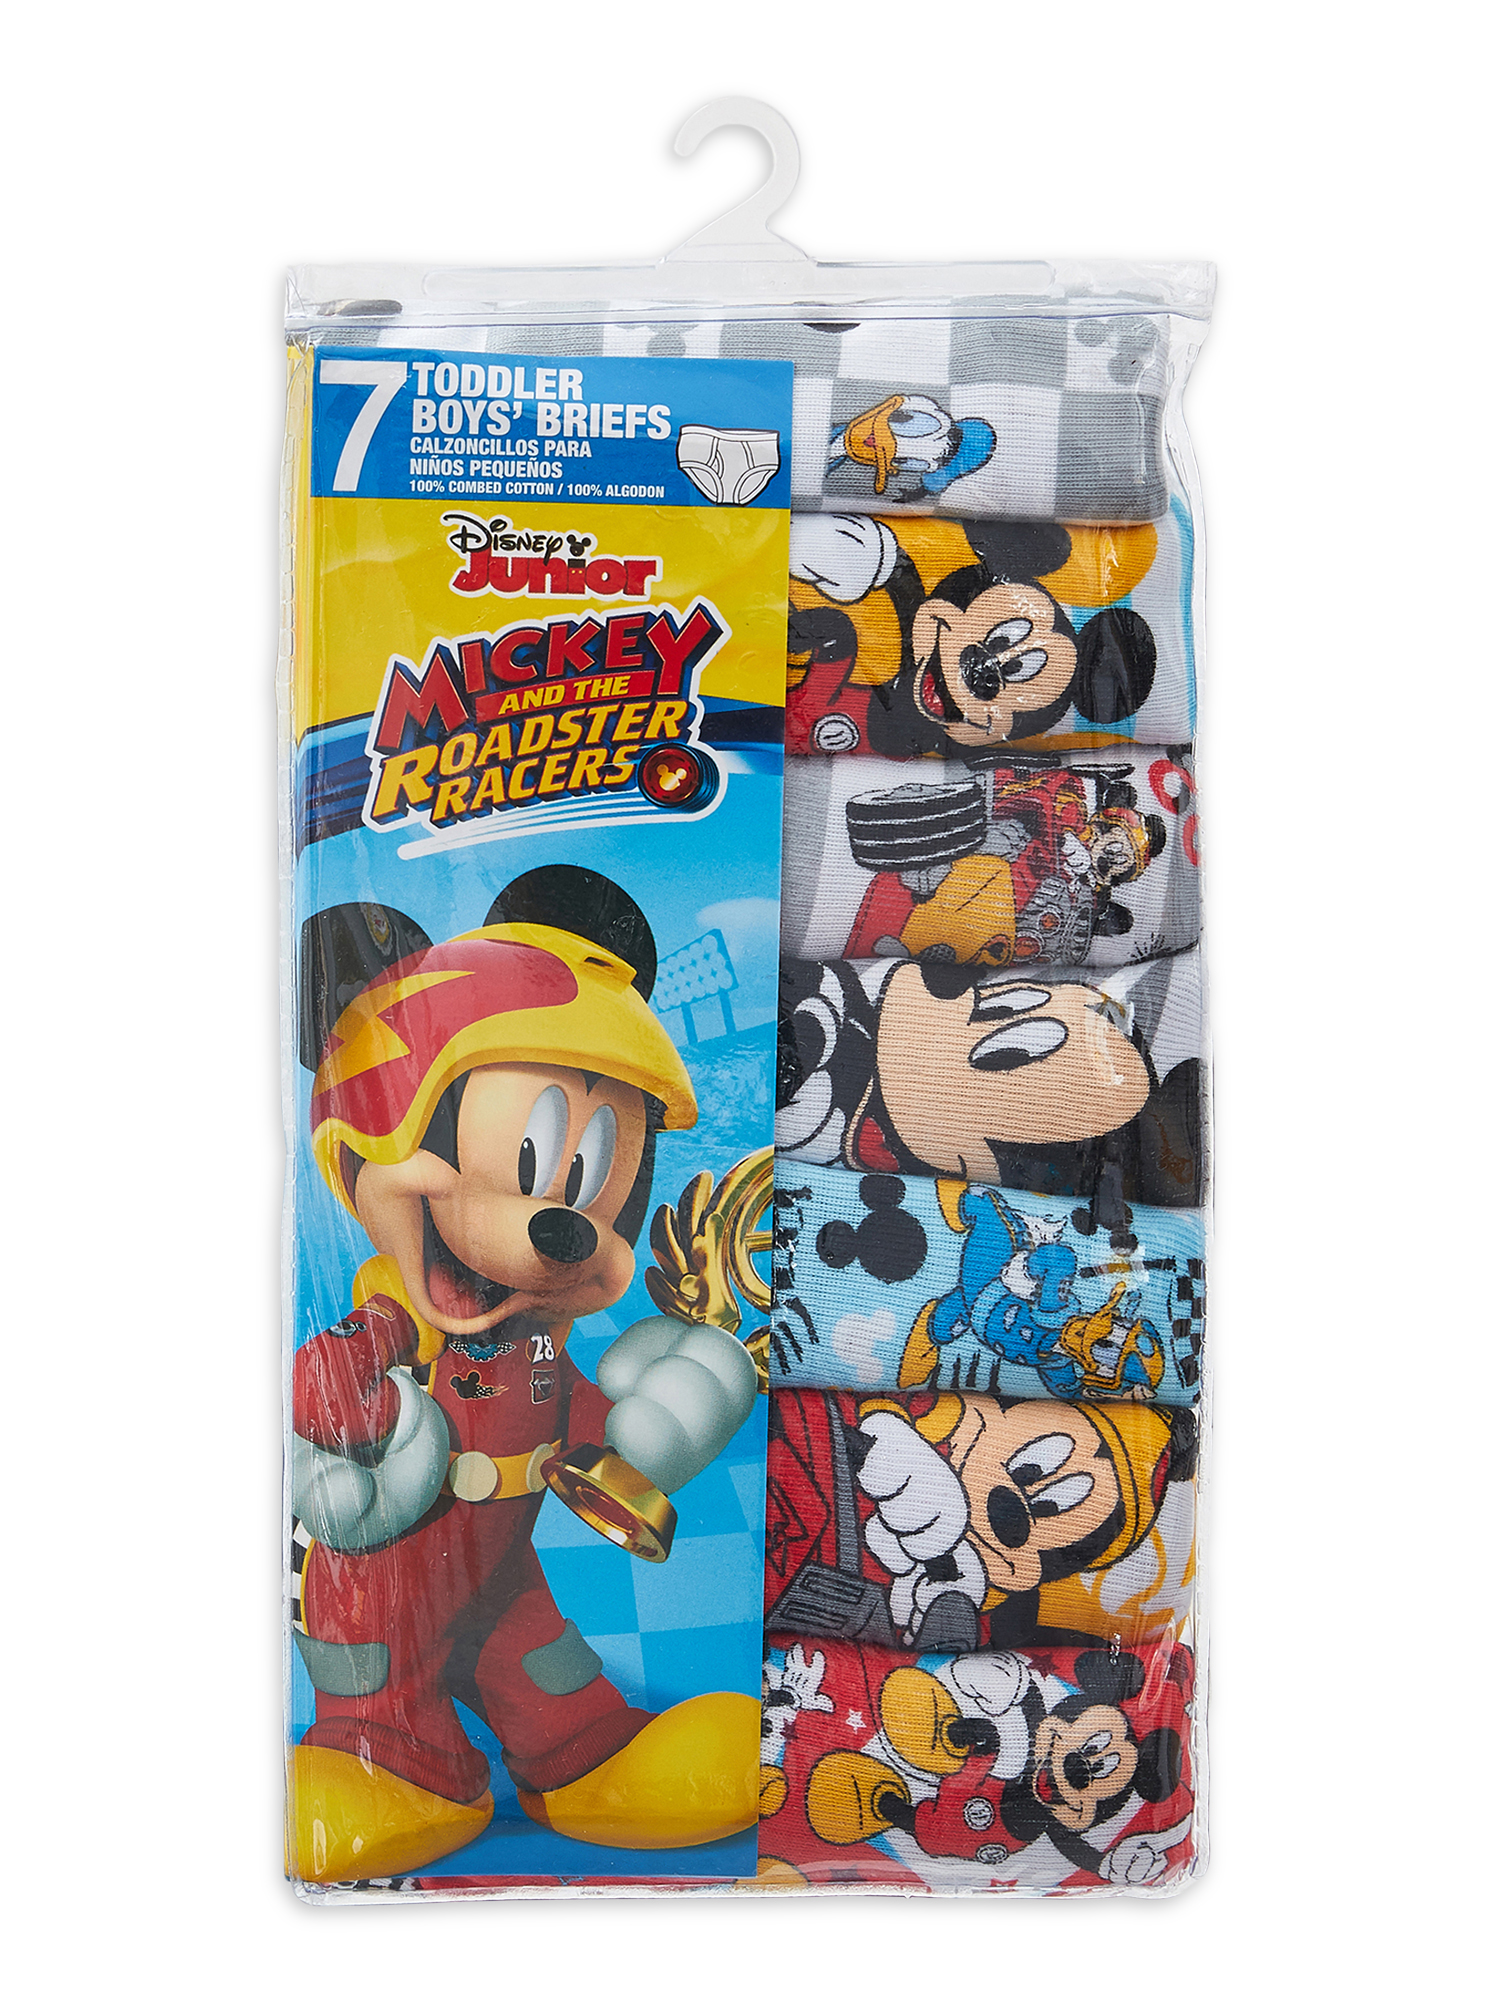 Mickey Mouse Toddler Boy Briefs, 7-Pack, Sizes 2T-4T - image 3 of 3